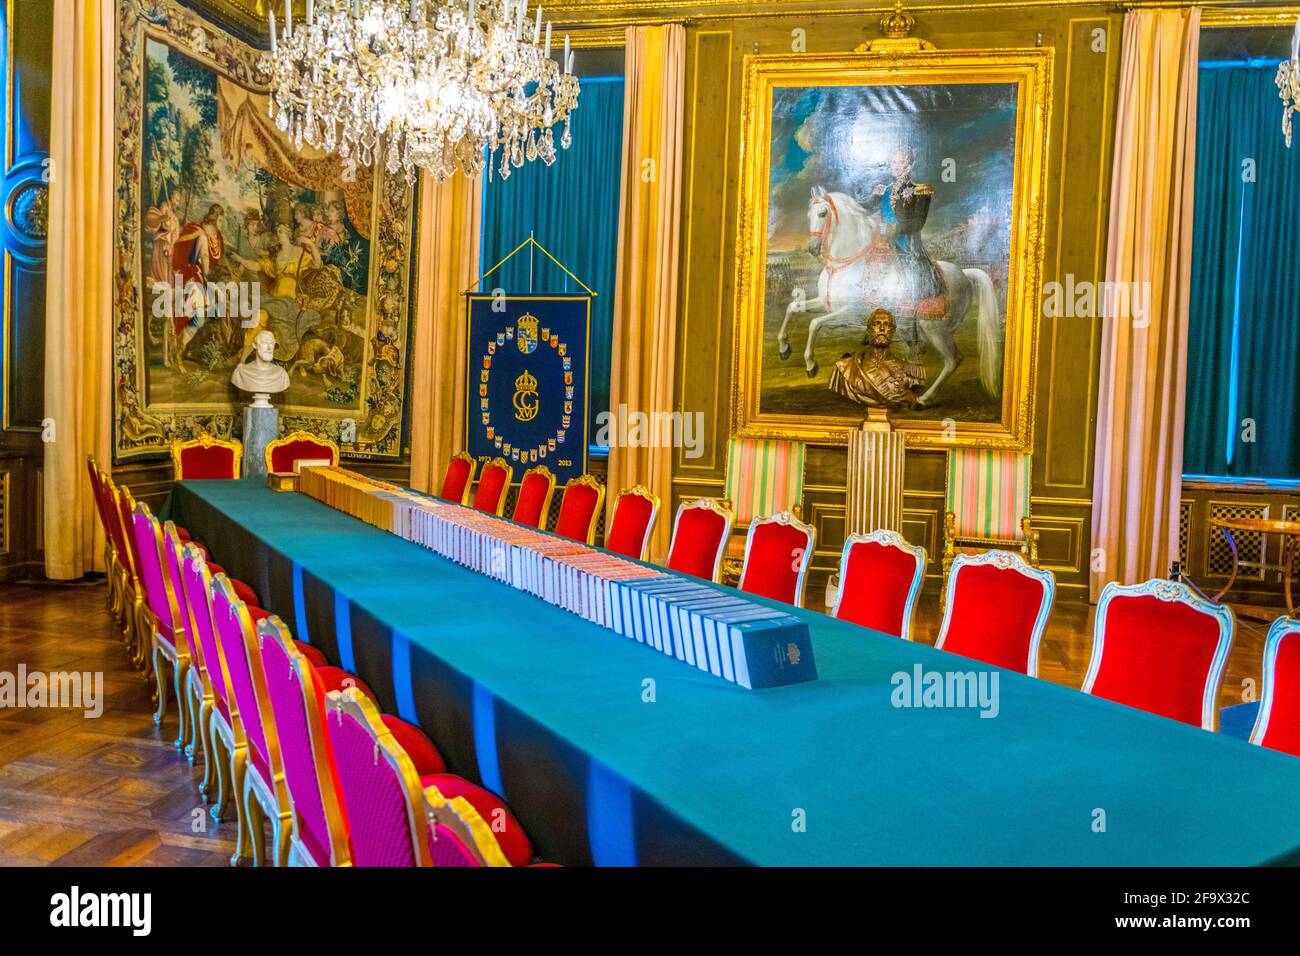 STOCKHOLM, SWEDEN, AUGUST 18, 2016: View of the dining hall of the Kungliga slottet castle in Gamla Stan, Stockholm, Sweden Stock Photo